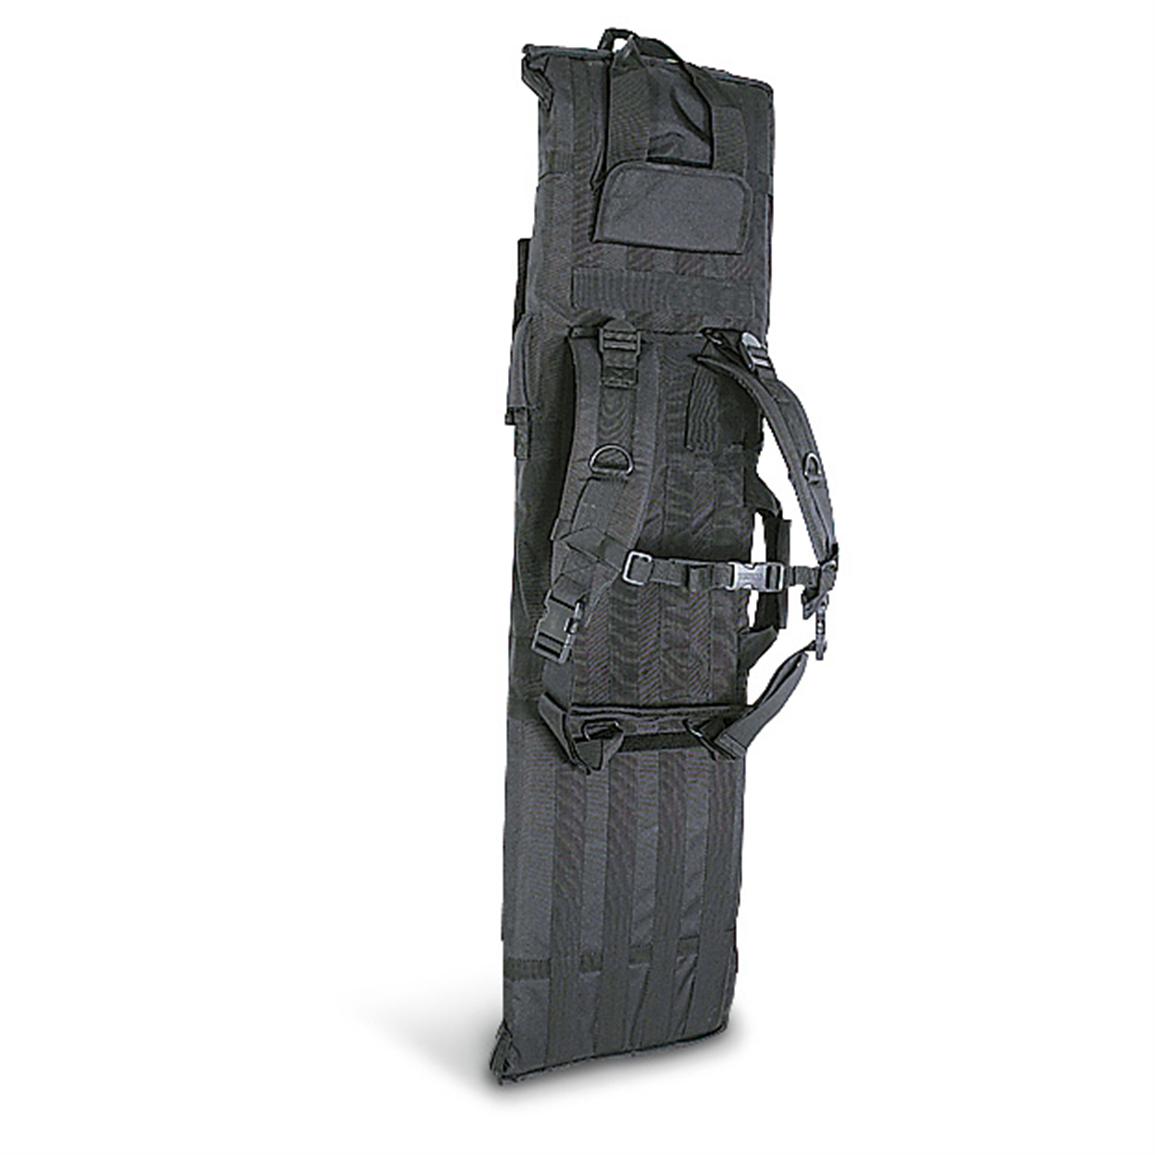 Voodoo Tactical™ Premium Shooter's Mat 157787, Tactical Gear at Sportsman's Guide